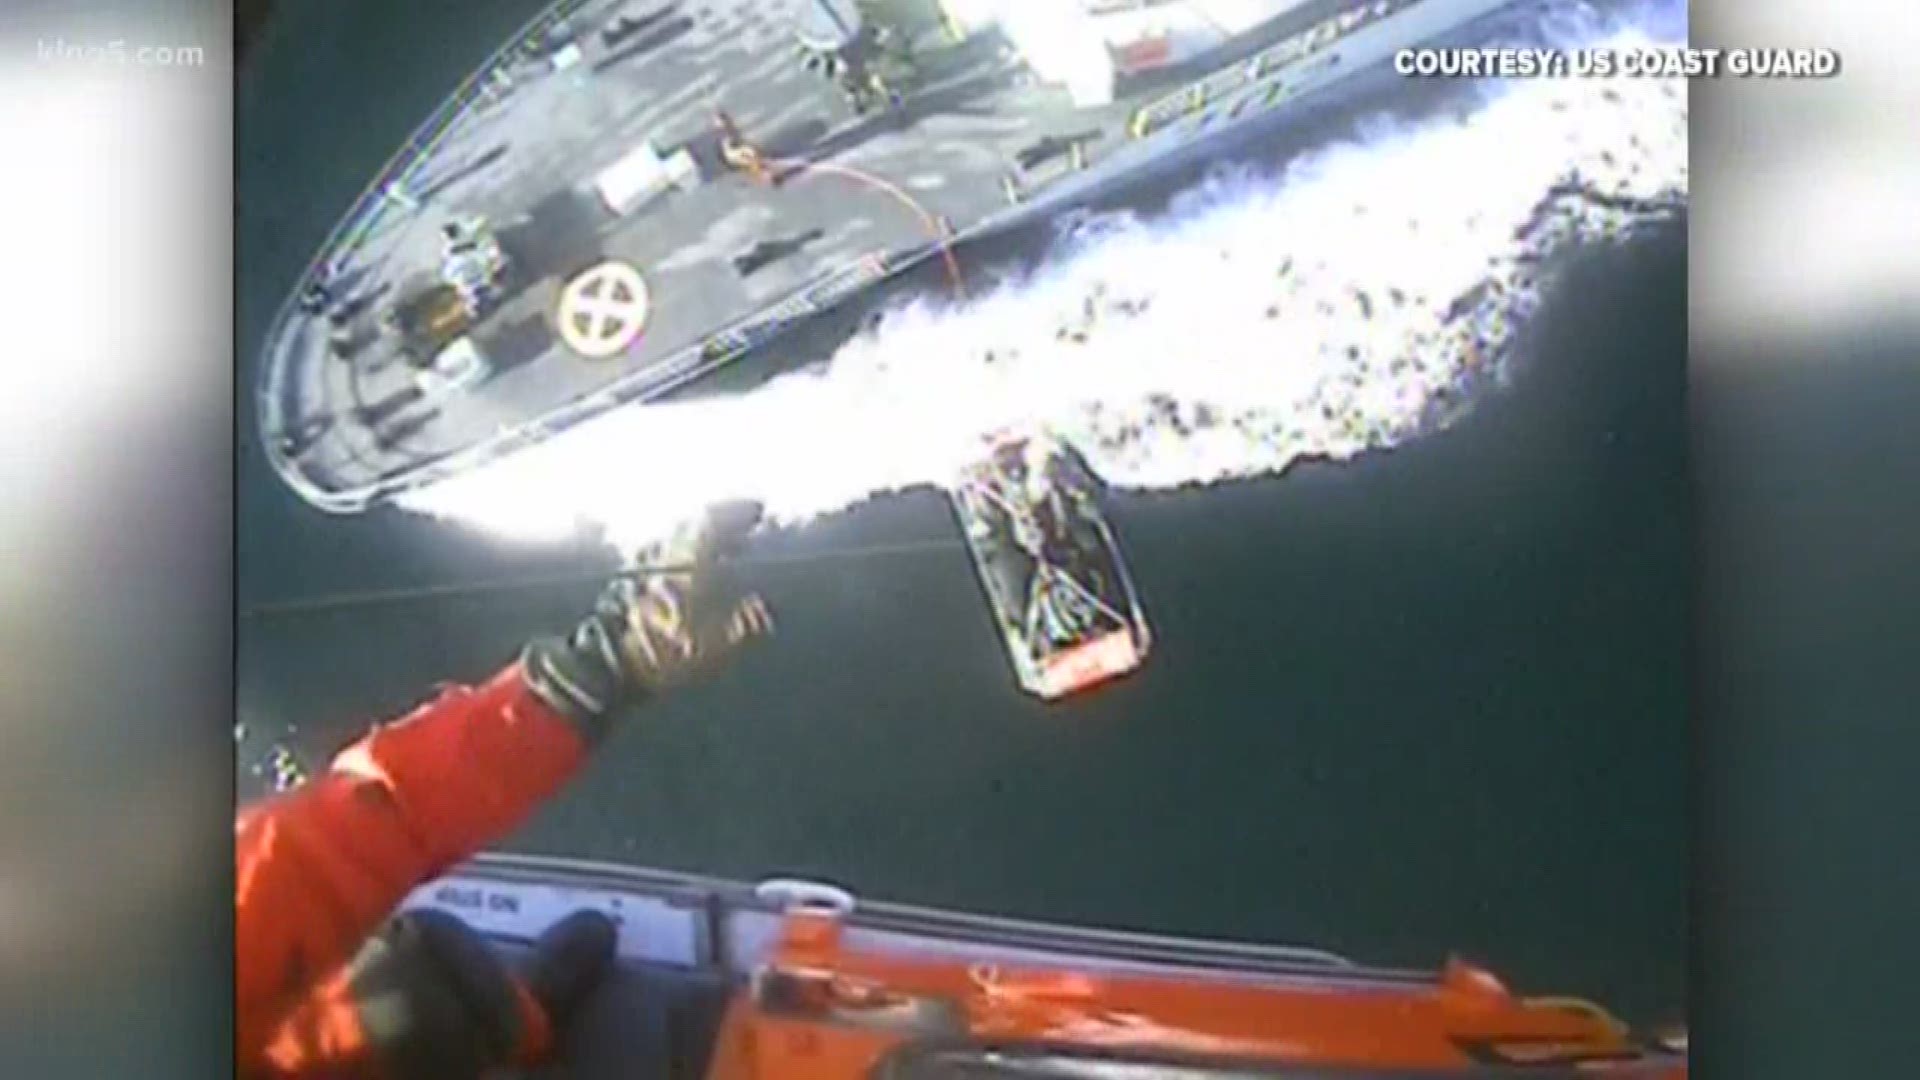 Coast Guard crews hoisted an injured man from a Canadian naval vessel transiting in the northern section of Admiralty Inlet, Friday.